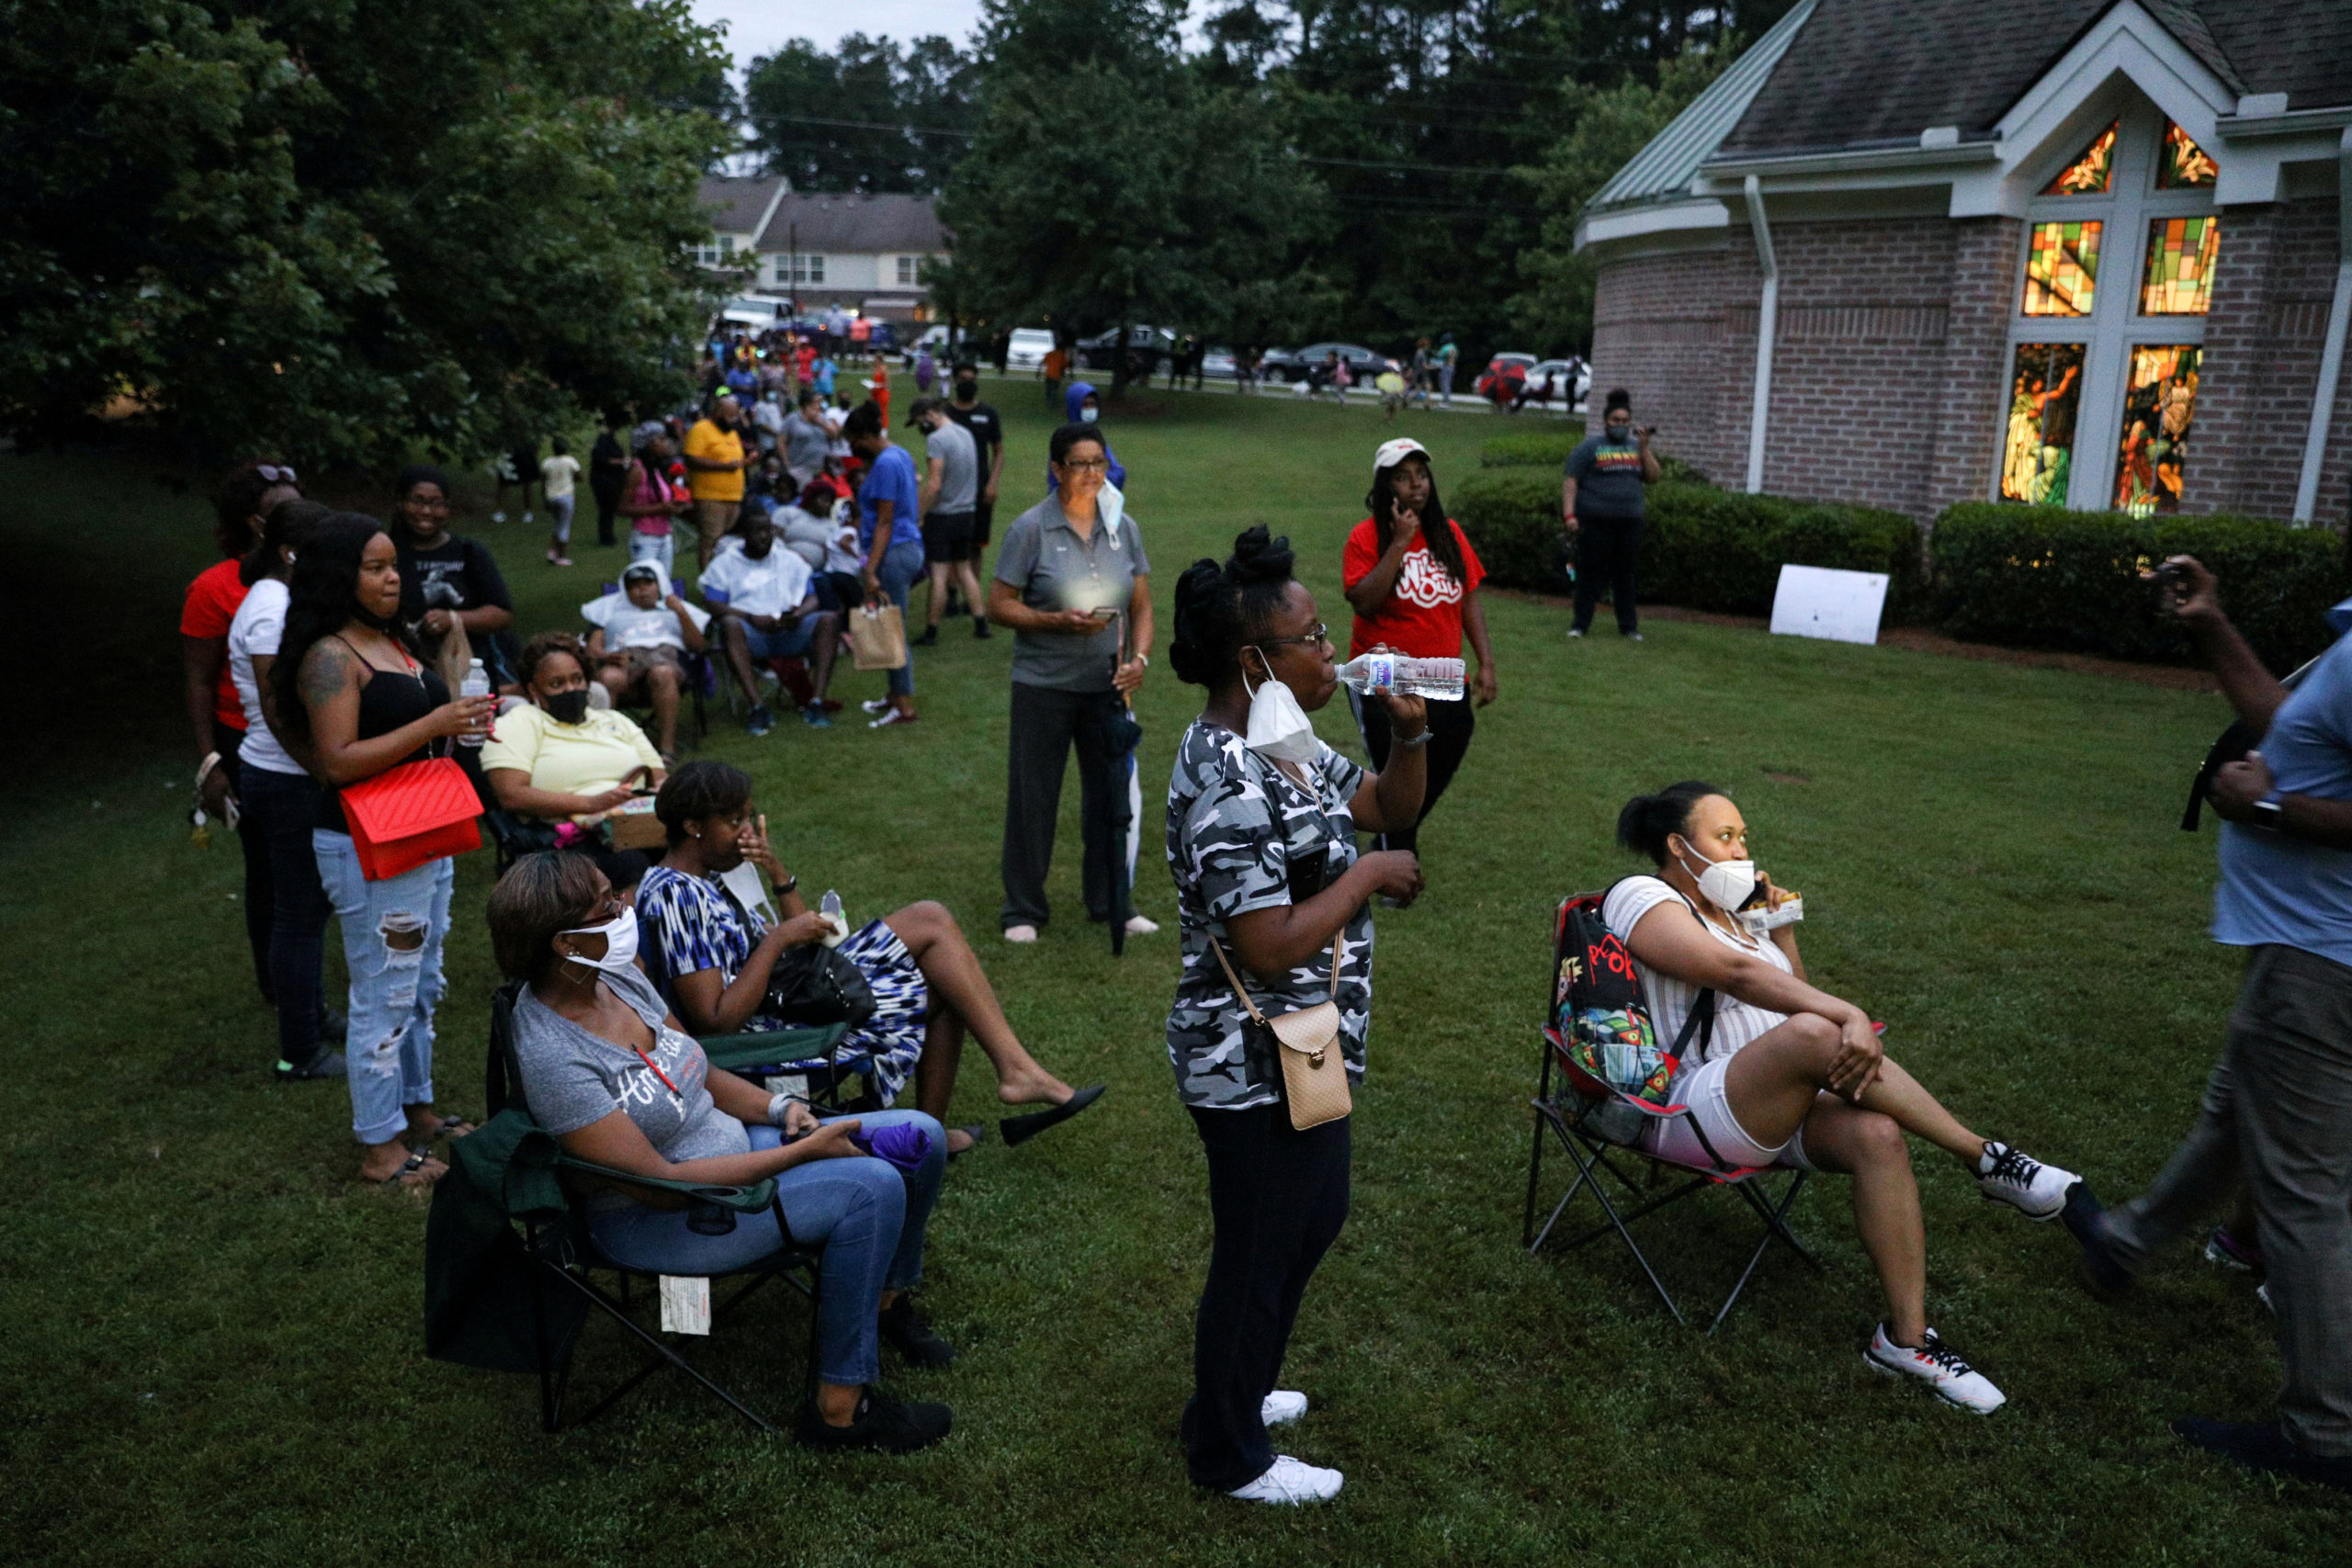 Voters line up at Christian City, an assisted living home, to cast their ballots after Democratic and Republican primaries were delayed due to coronavirus restrictions in Union City, Georgia in June 2020